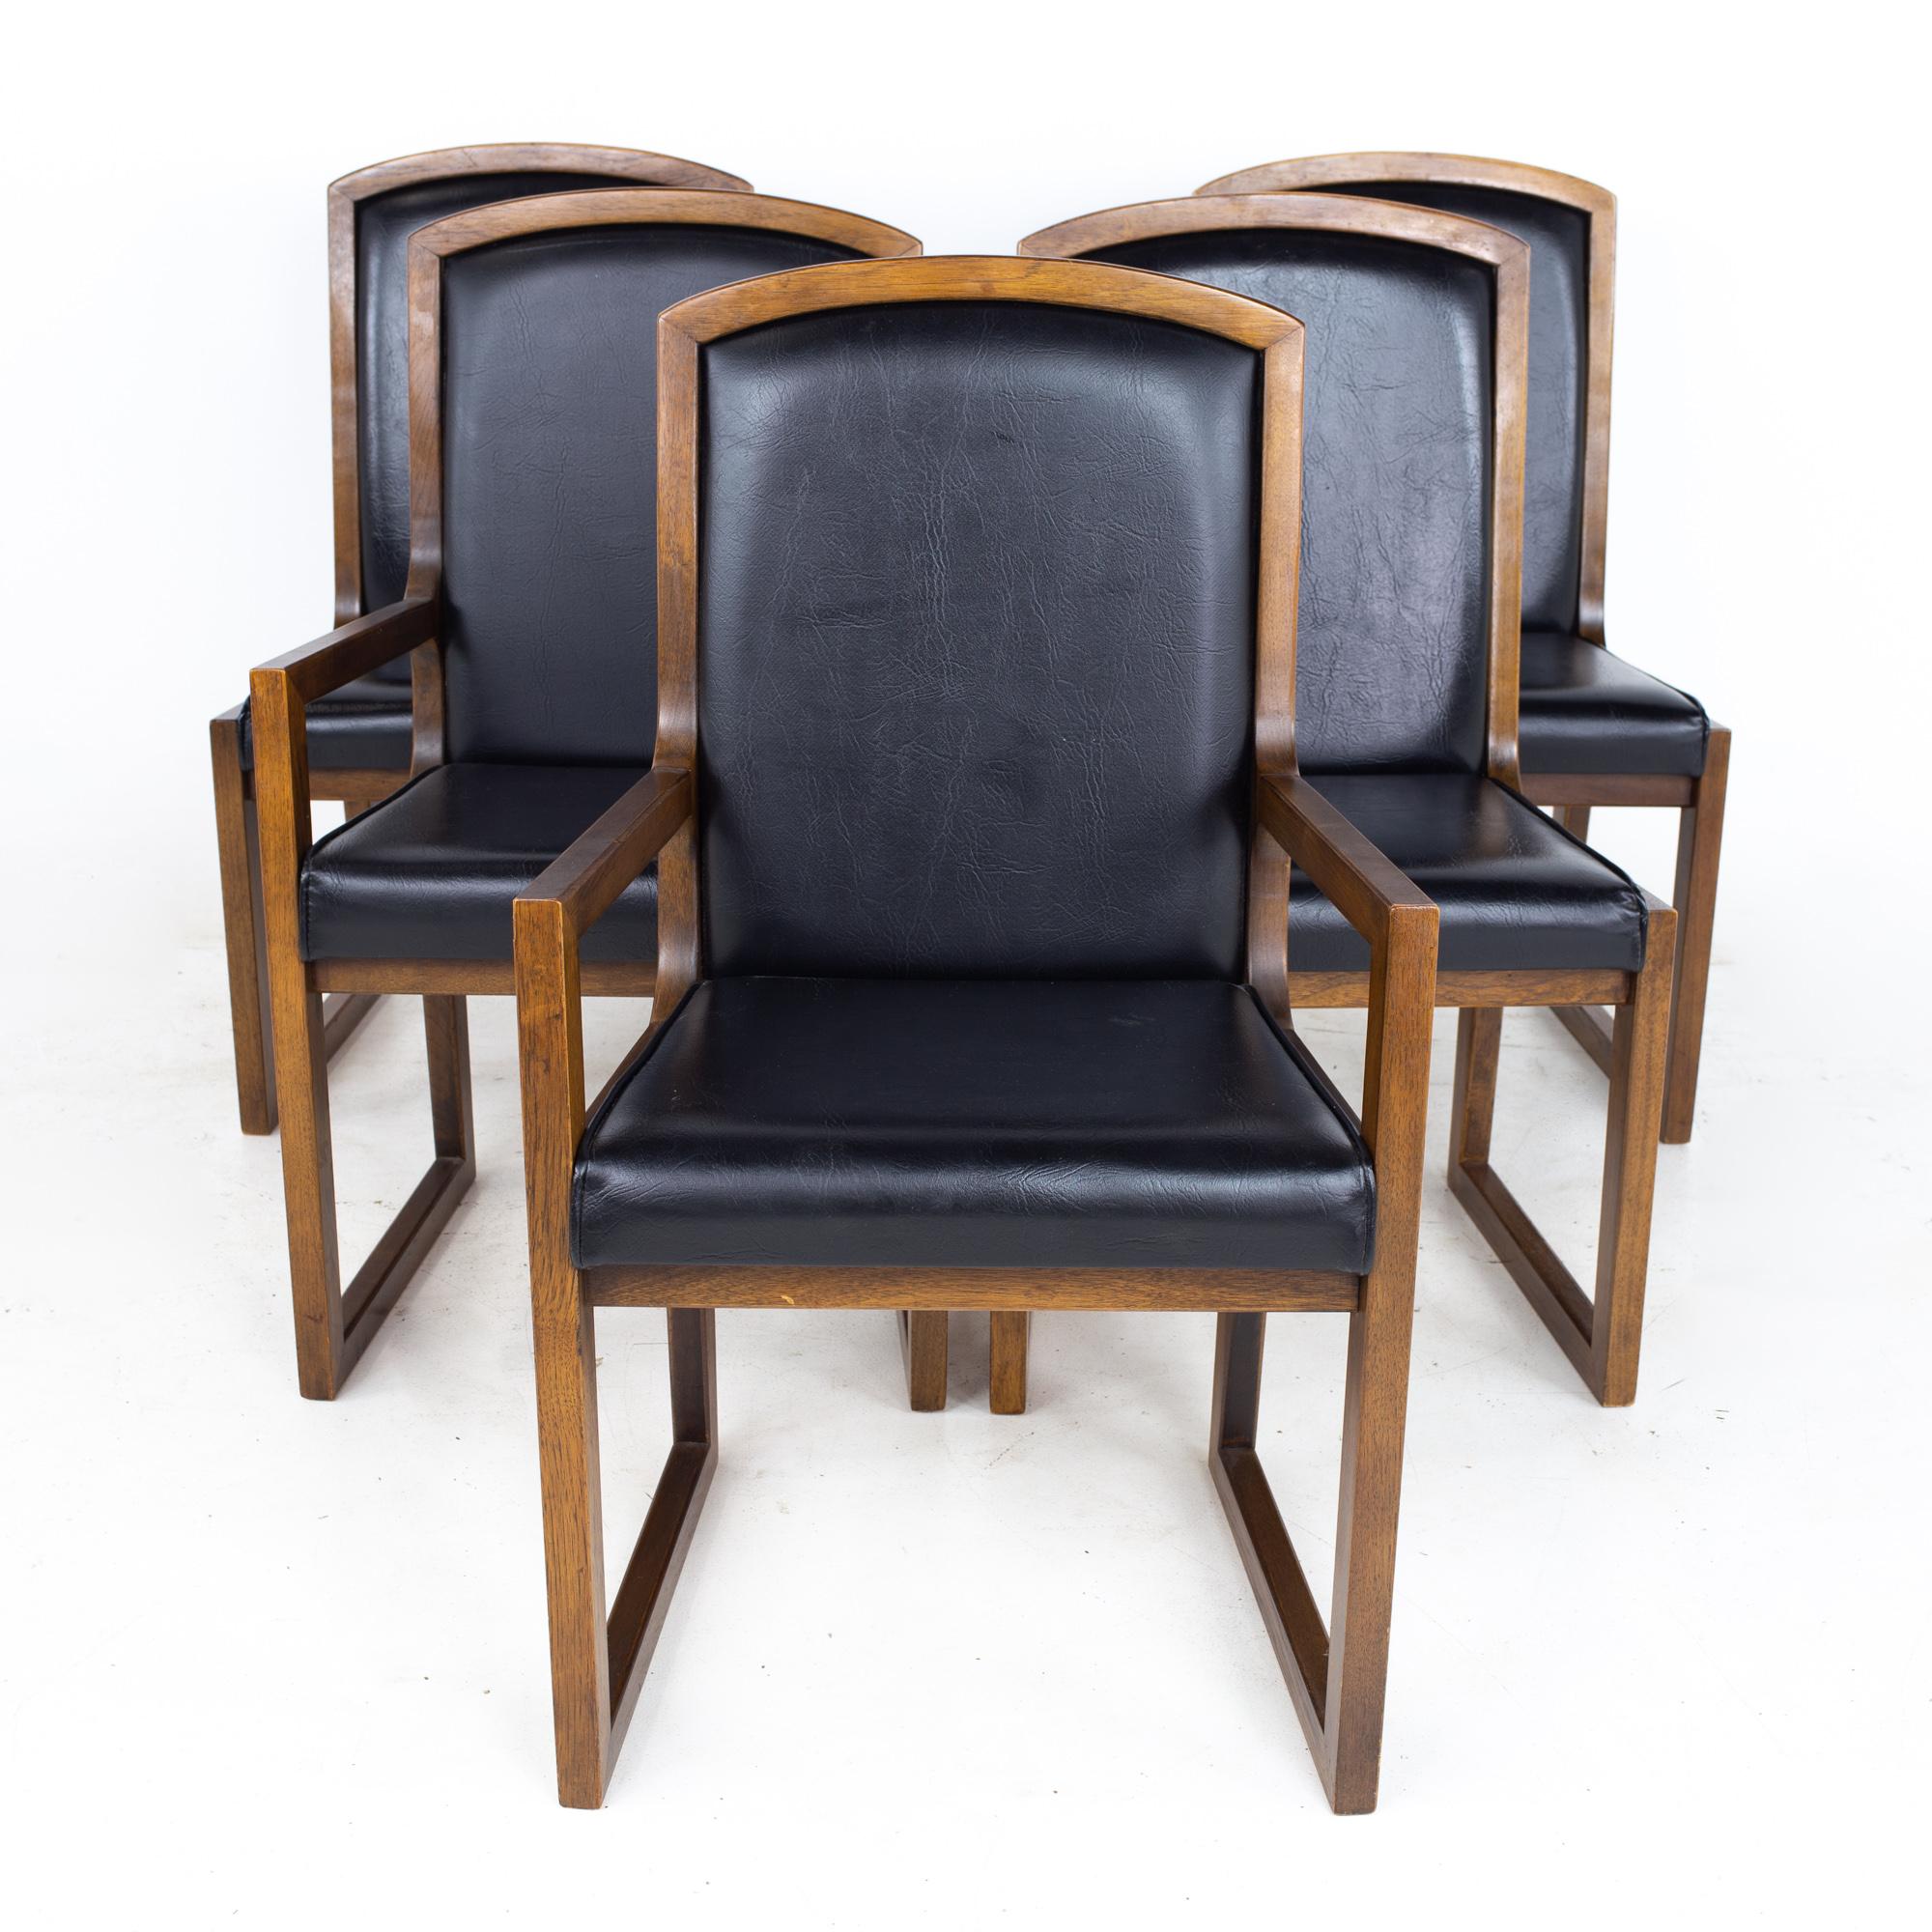 Thomasville mid century walnut and black naugahyde sleigh leg dining chairs - set of 6
Each chair measures: 21.5 wide x 19 deep x 37.5 high, with a seat height of 18.5 inches and an arm height of 24.5 inches

All pieces of furniture can be had in